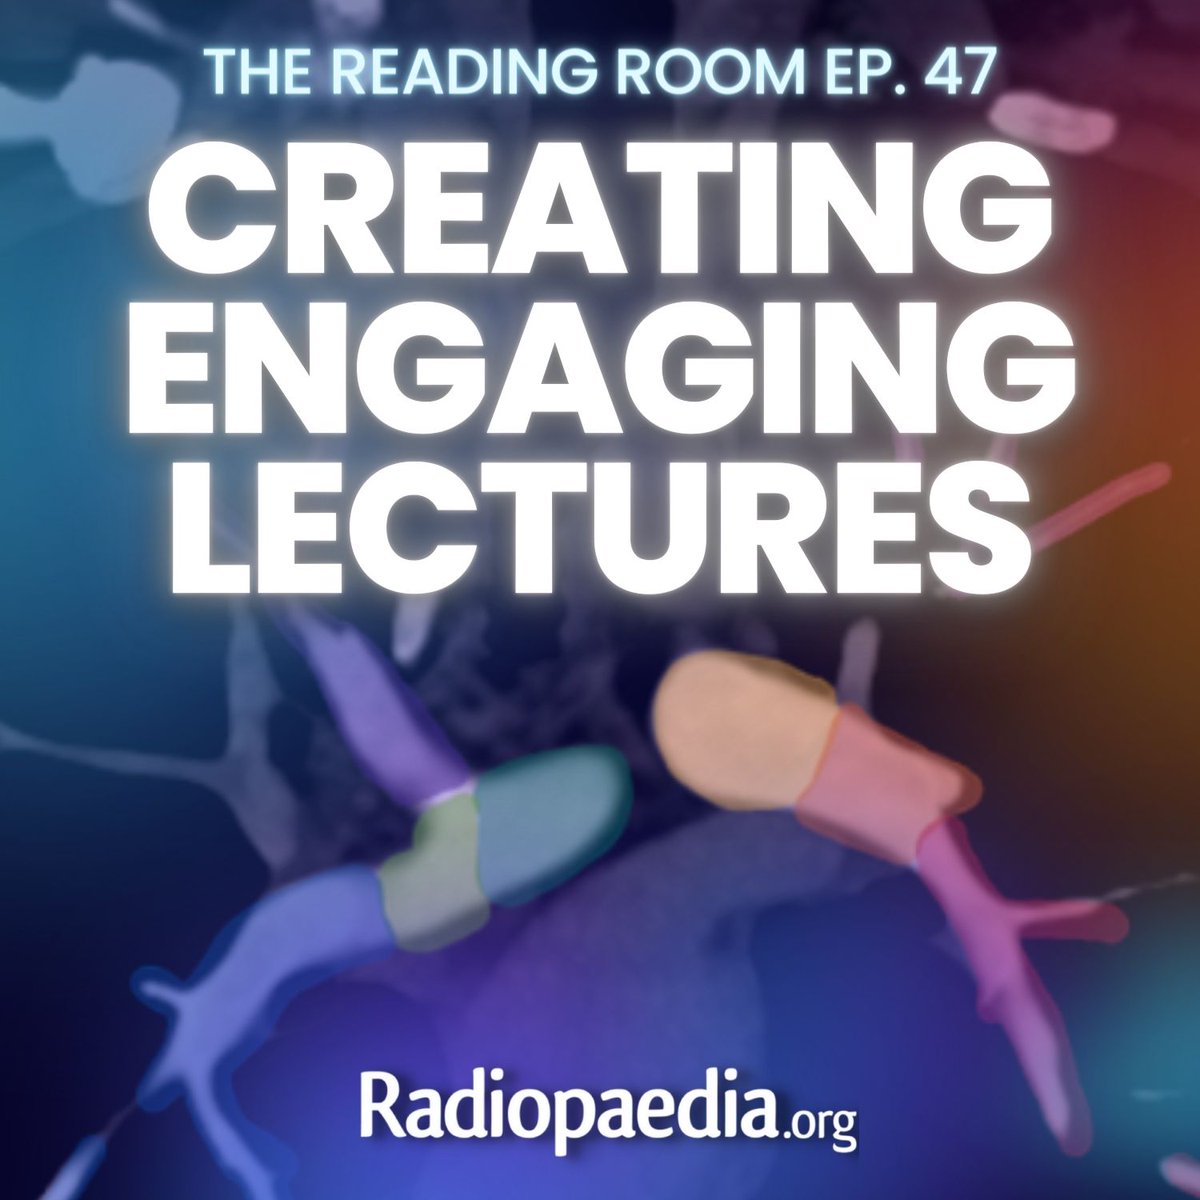 New @Radiopaedia podcast episode featuring the delightful @docskalski and @teachplaygrub! We chat about tips for creating engaging and effective radiology lectures. Plus, Frank delivers a monologue and it's time to vote in our Stay Rad Song Contest! 🎧 radiopaedia.org/podcast